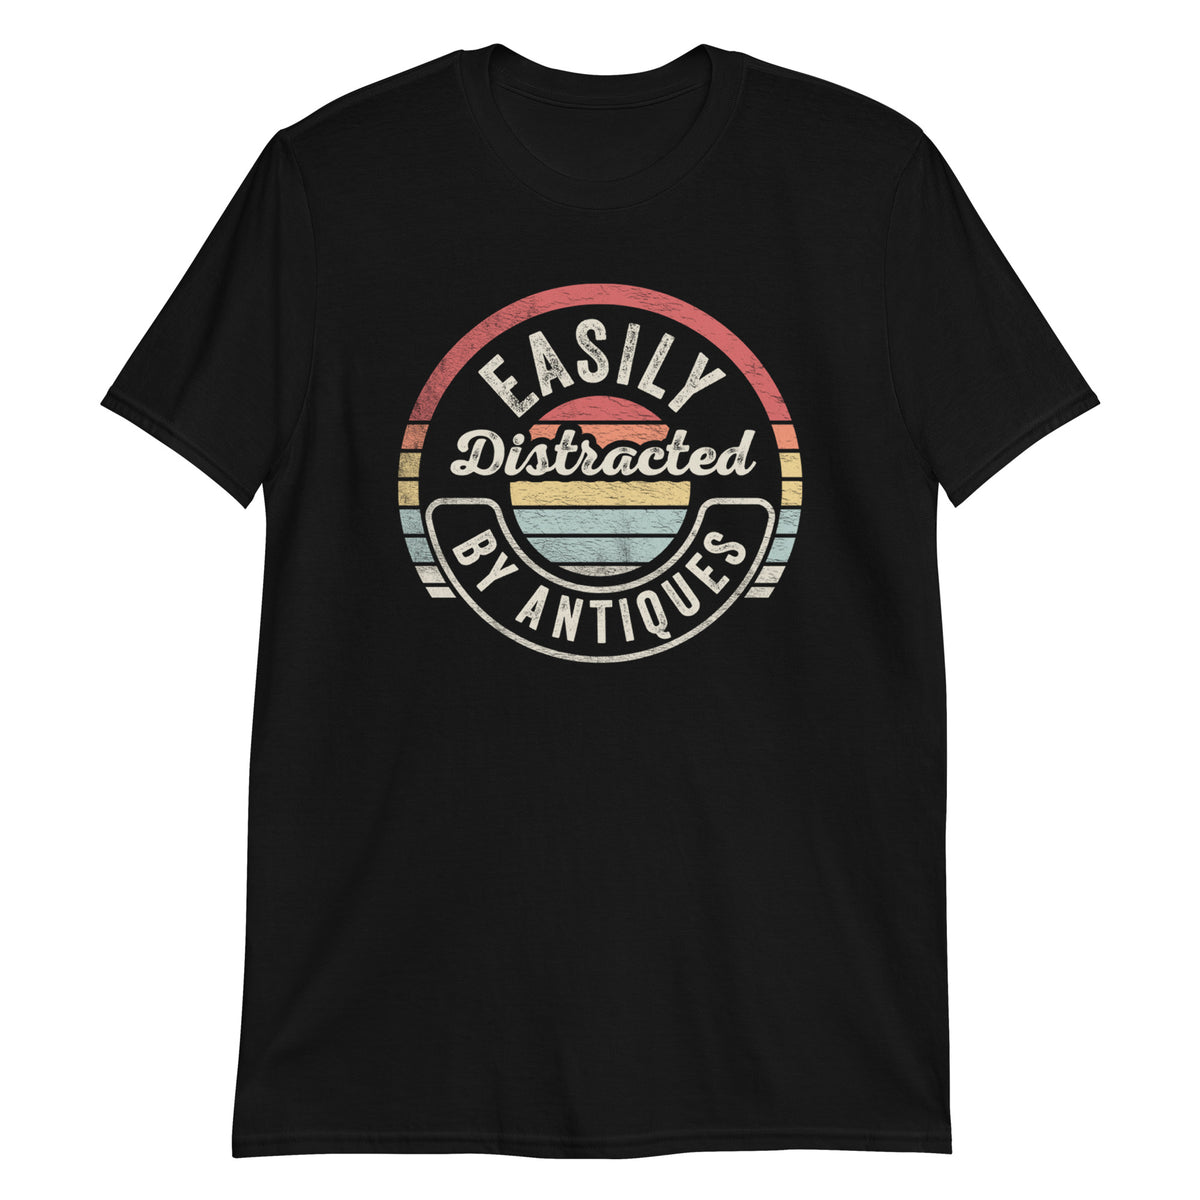 Easily Distracted By Antiques Antique Lover Retro Vintage Style T-Shirt